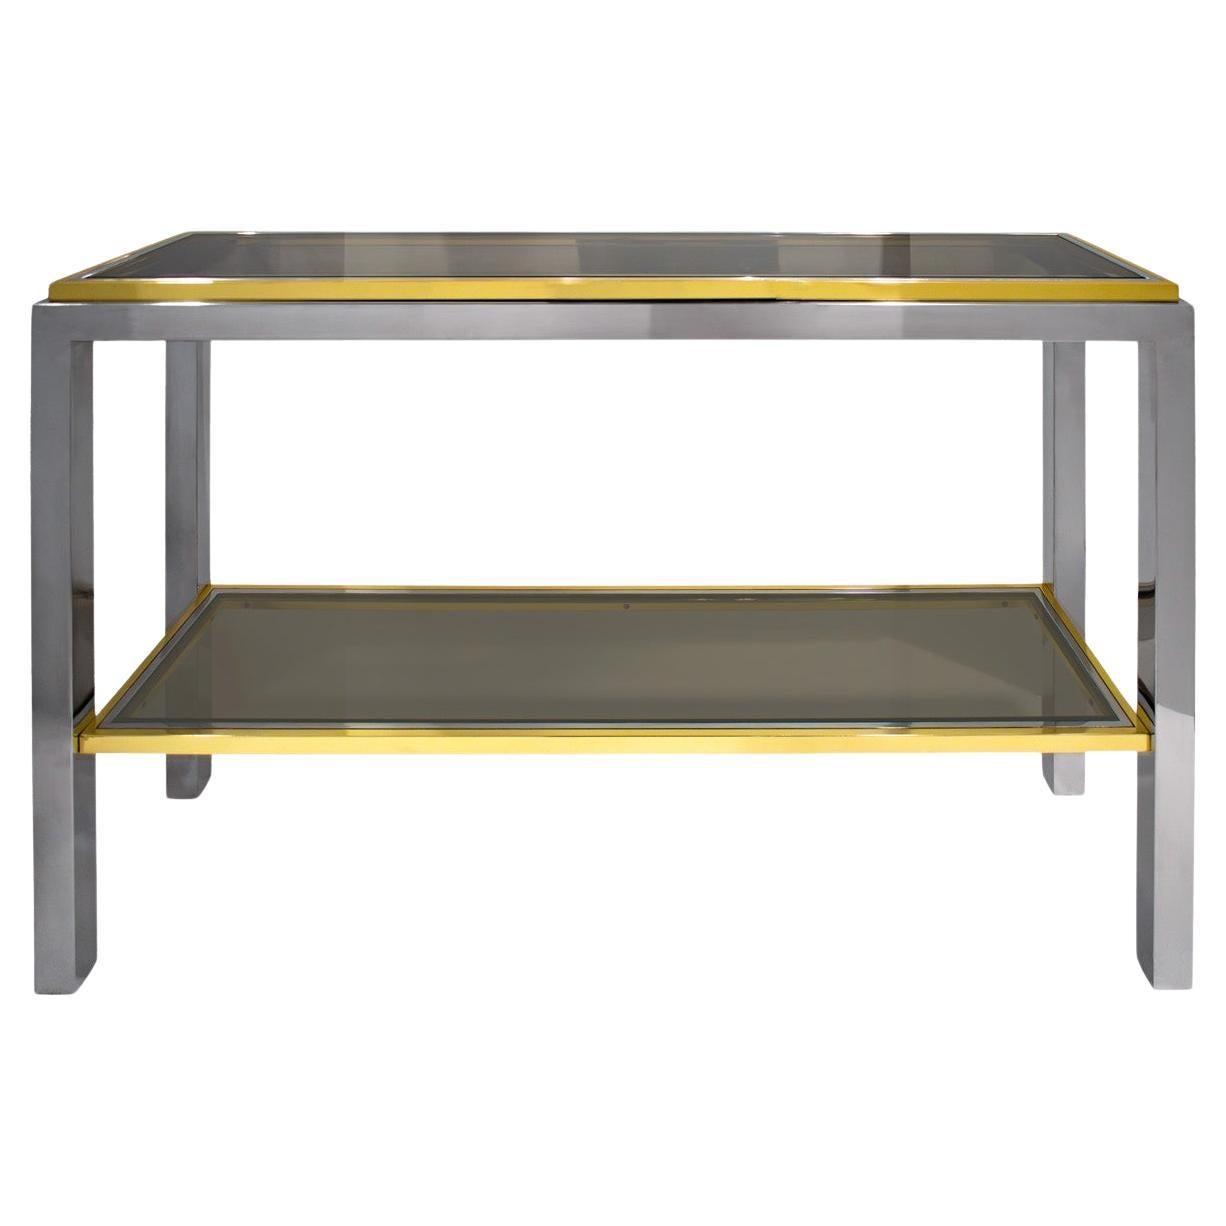 Willy Rizzo "Flaminia Console Table" in Chrome and Brass 1970s (Signed) For Sale